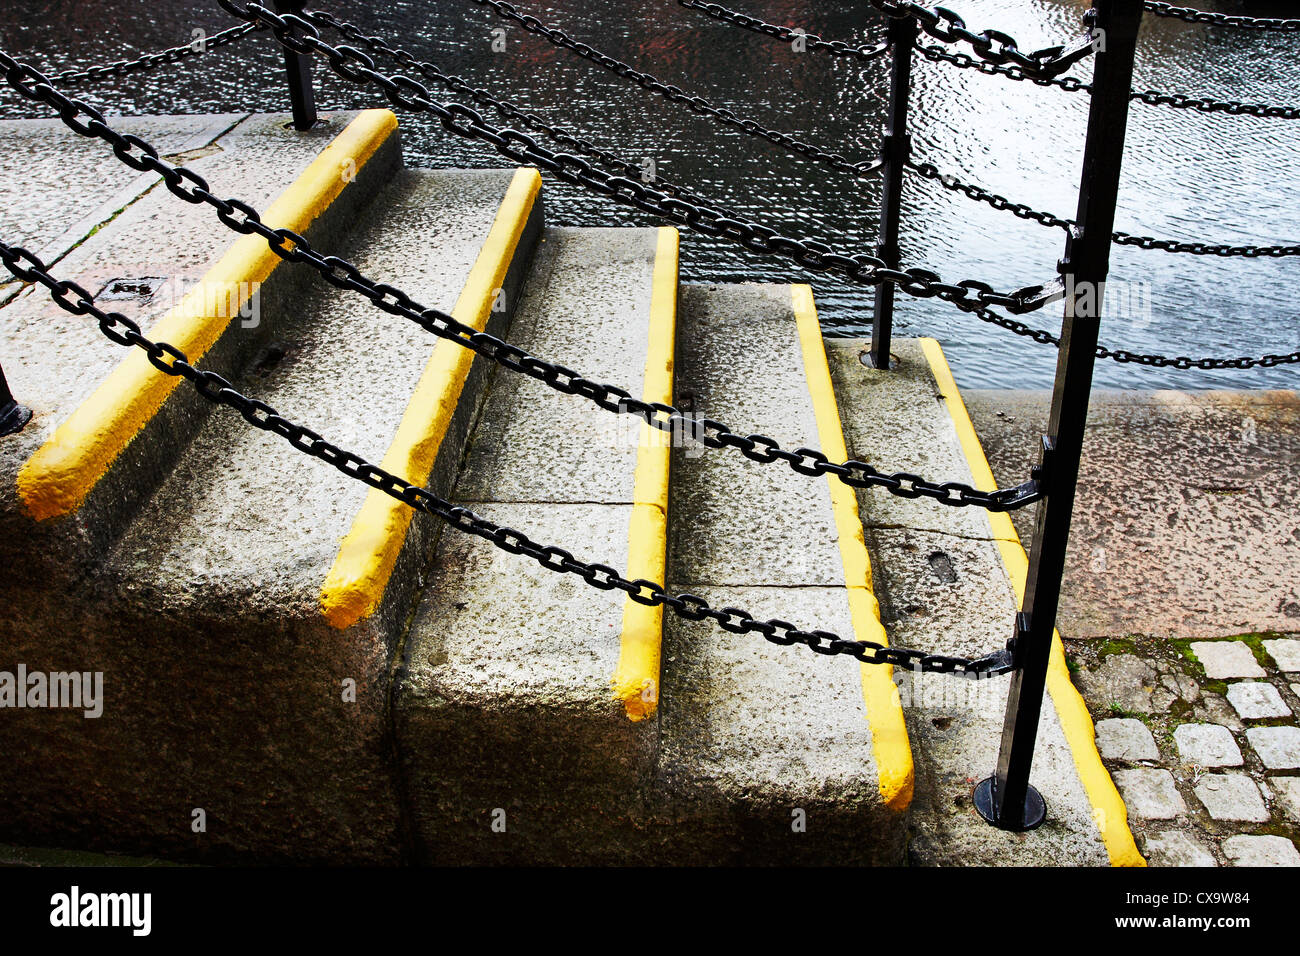 Well worn dockside steps at the Albert Dock complex in Liverpool, UK. Stock Photo